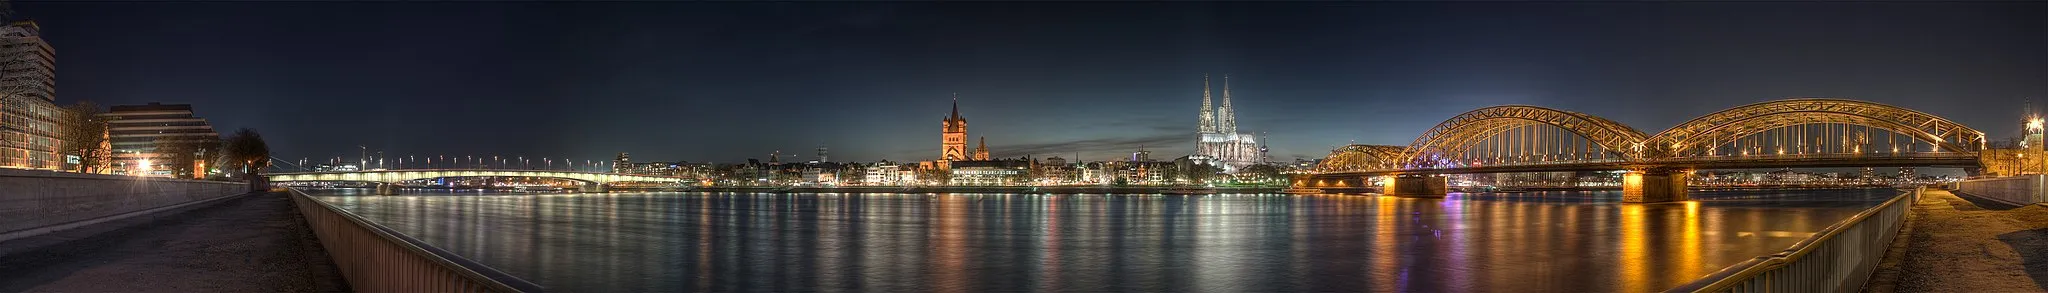 Photo showing: Panoramic view of the old town of Cologne (North Rhine-Westphalia, Germany) taken from the other side of the river Rhine at dusk (09:58pm). You can see (from left to right) the former Lufthansa corporate headquarters, the Deutzer bridge, Great St. Martin Church, Cologne Cathedral, Museum Ludwig, the Cologne telecommunications tower Colonius, the Hohenzollern bridge and the blue lights and reflections of the Cologne Musical Dome.Five images with 3 exposures each (15 images in total) were merged together. The resulting 32bit HDRI was converted to an 8bit LDRI. Images were taken with a Canon EOS 1000D (EOS Digital Rebel XS or EOS Kiss F) and 18-55mm lens at f/5.6.